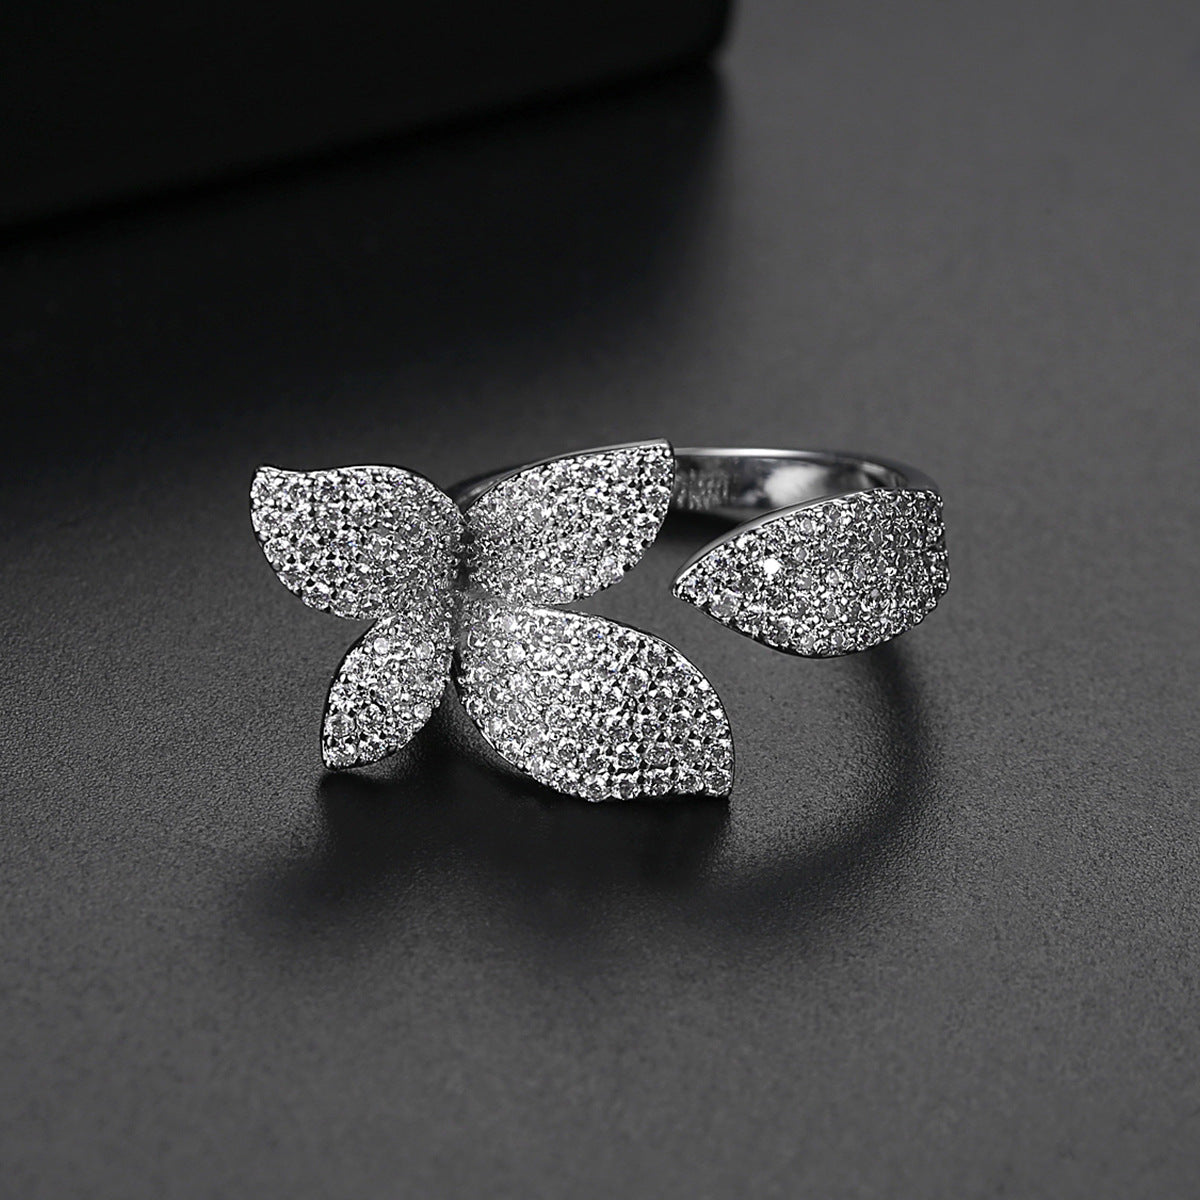 Charming Butterfly Ring